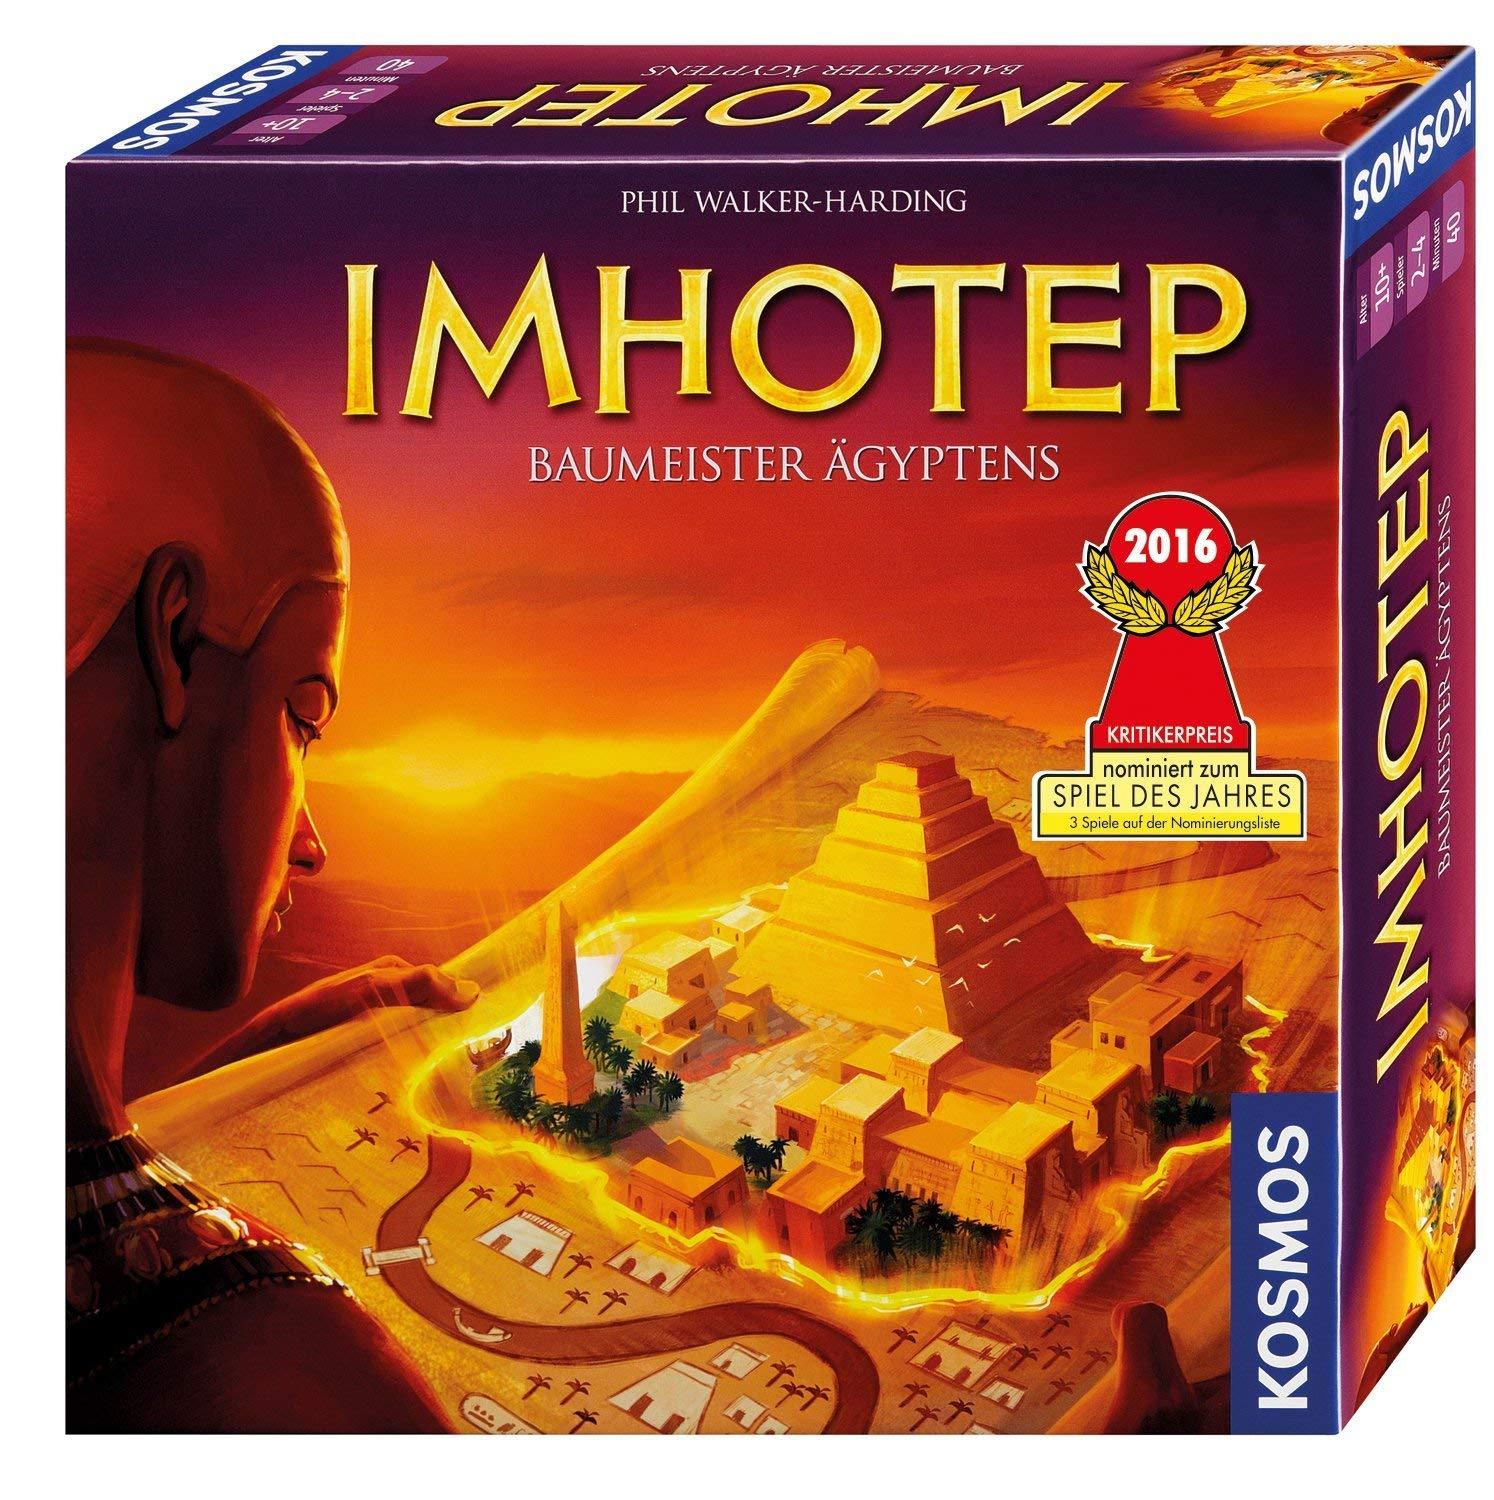 Imhotep 0 (0)